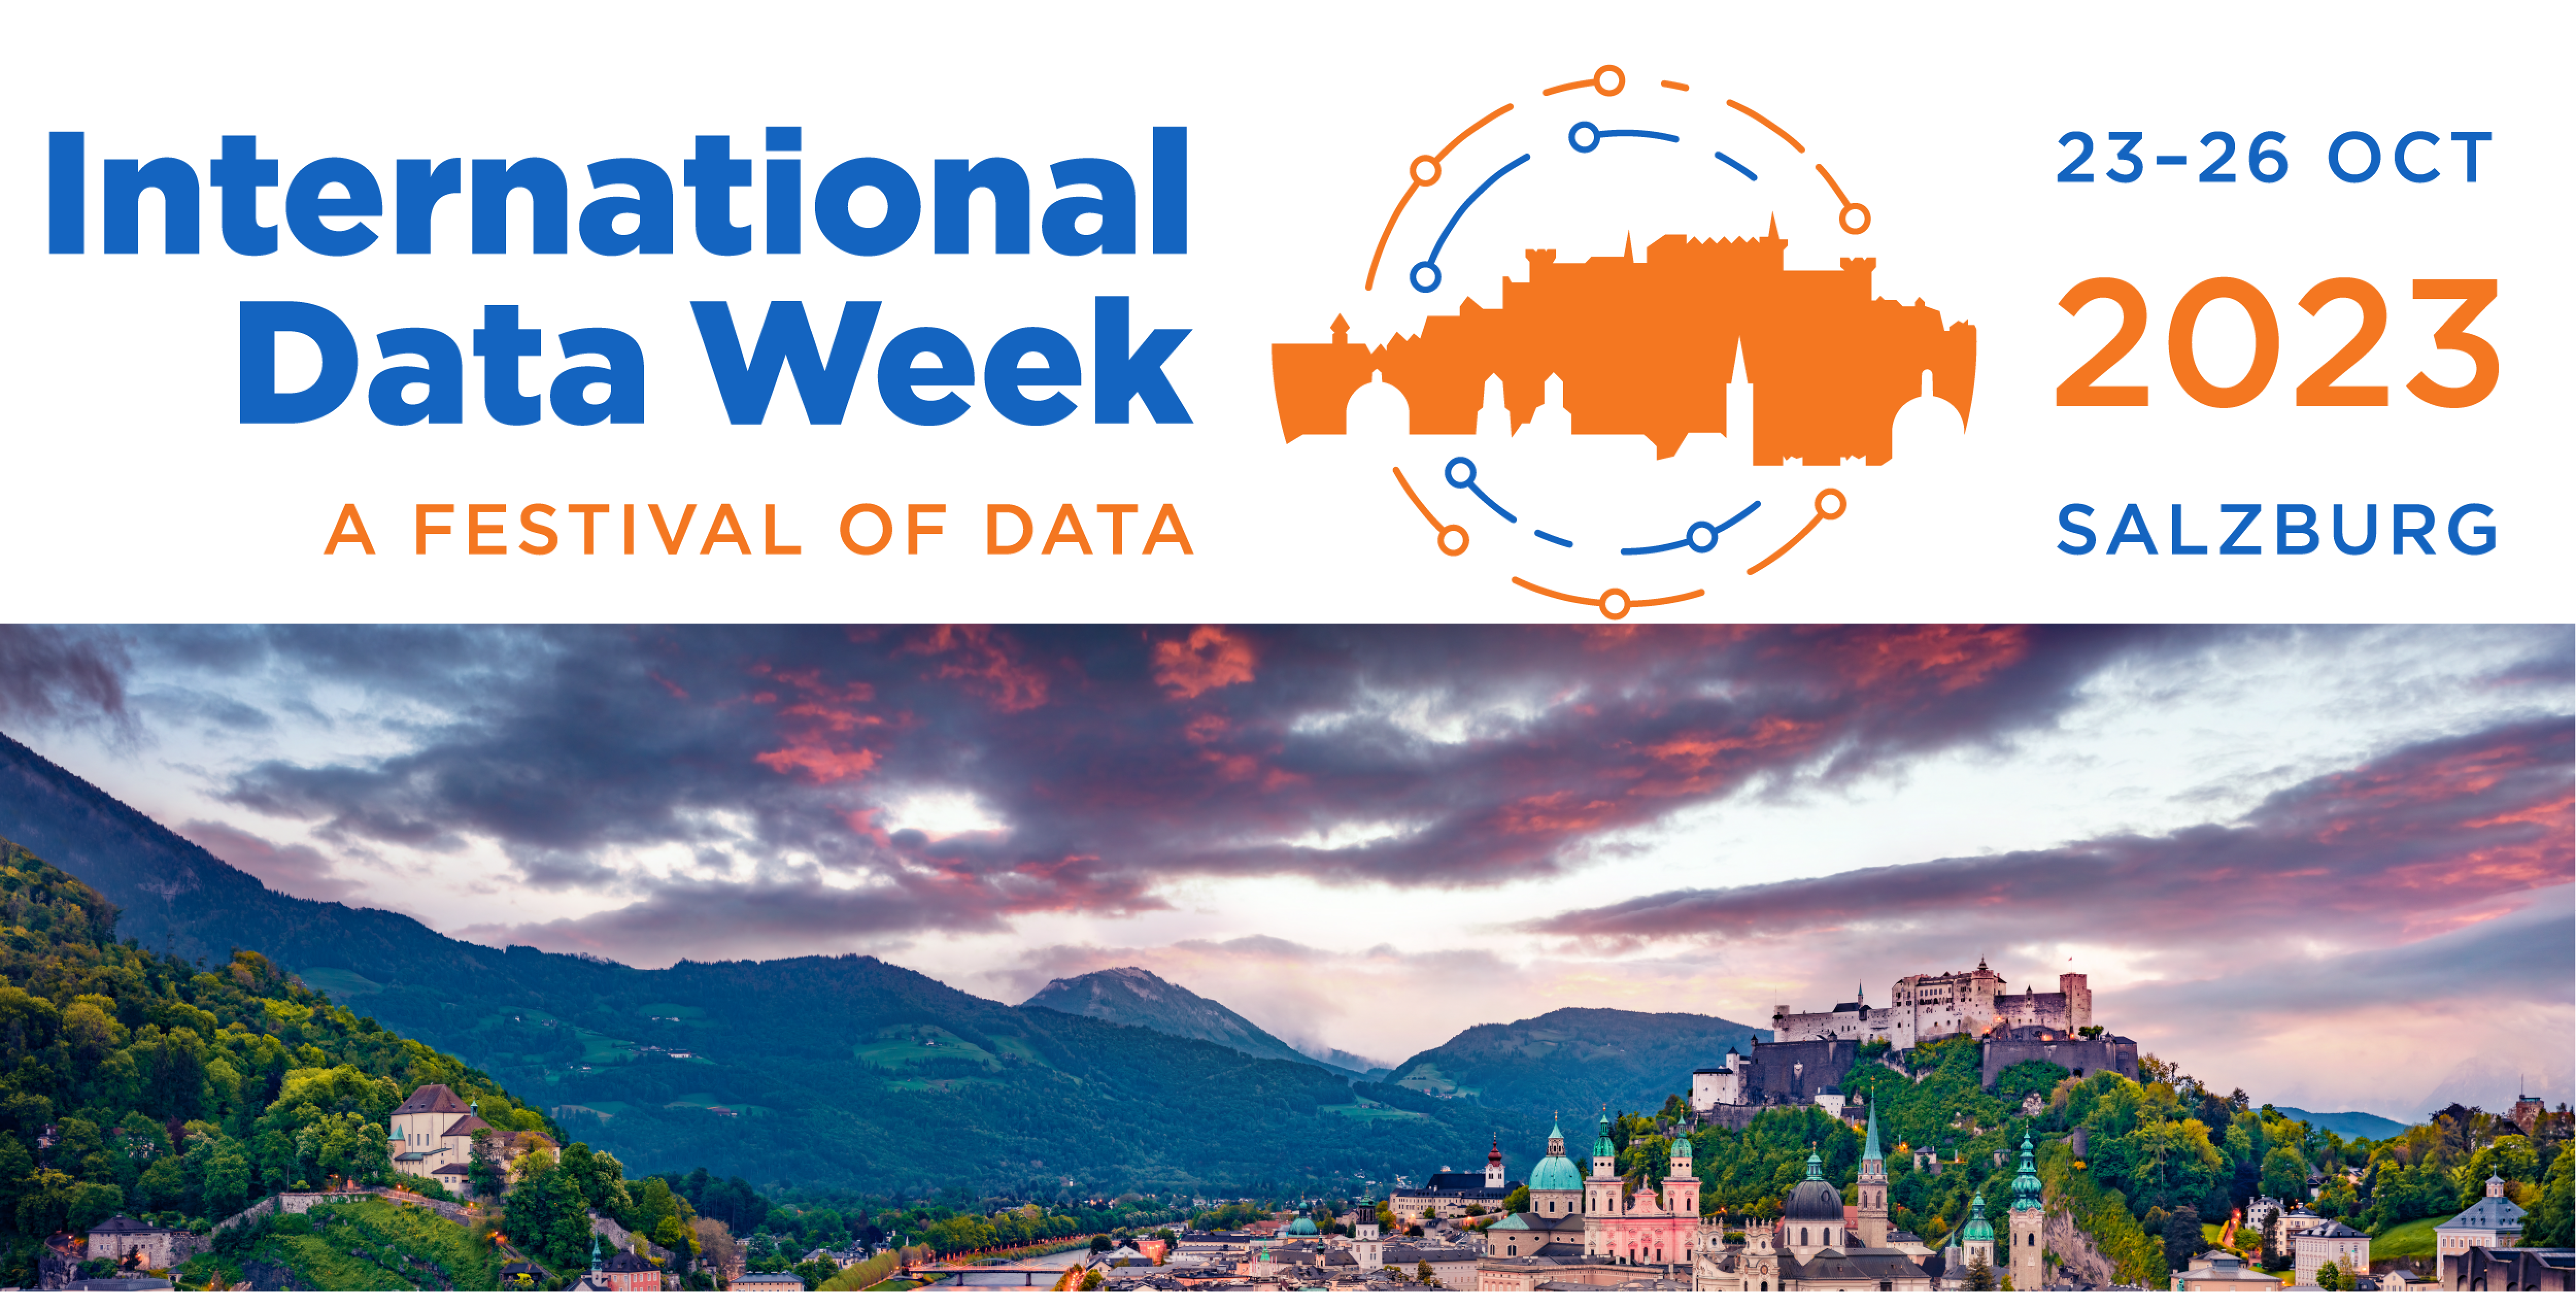 Blue Text reads "International Data Week" and Orange Text reads "A Festival of Data" "23-26 Oct 2023 Salzburg Austria" with an image of the Salzburg cityscape at dusk.